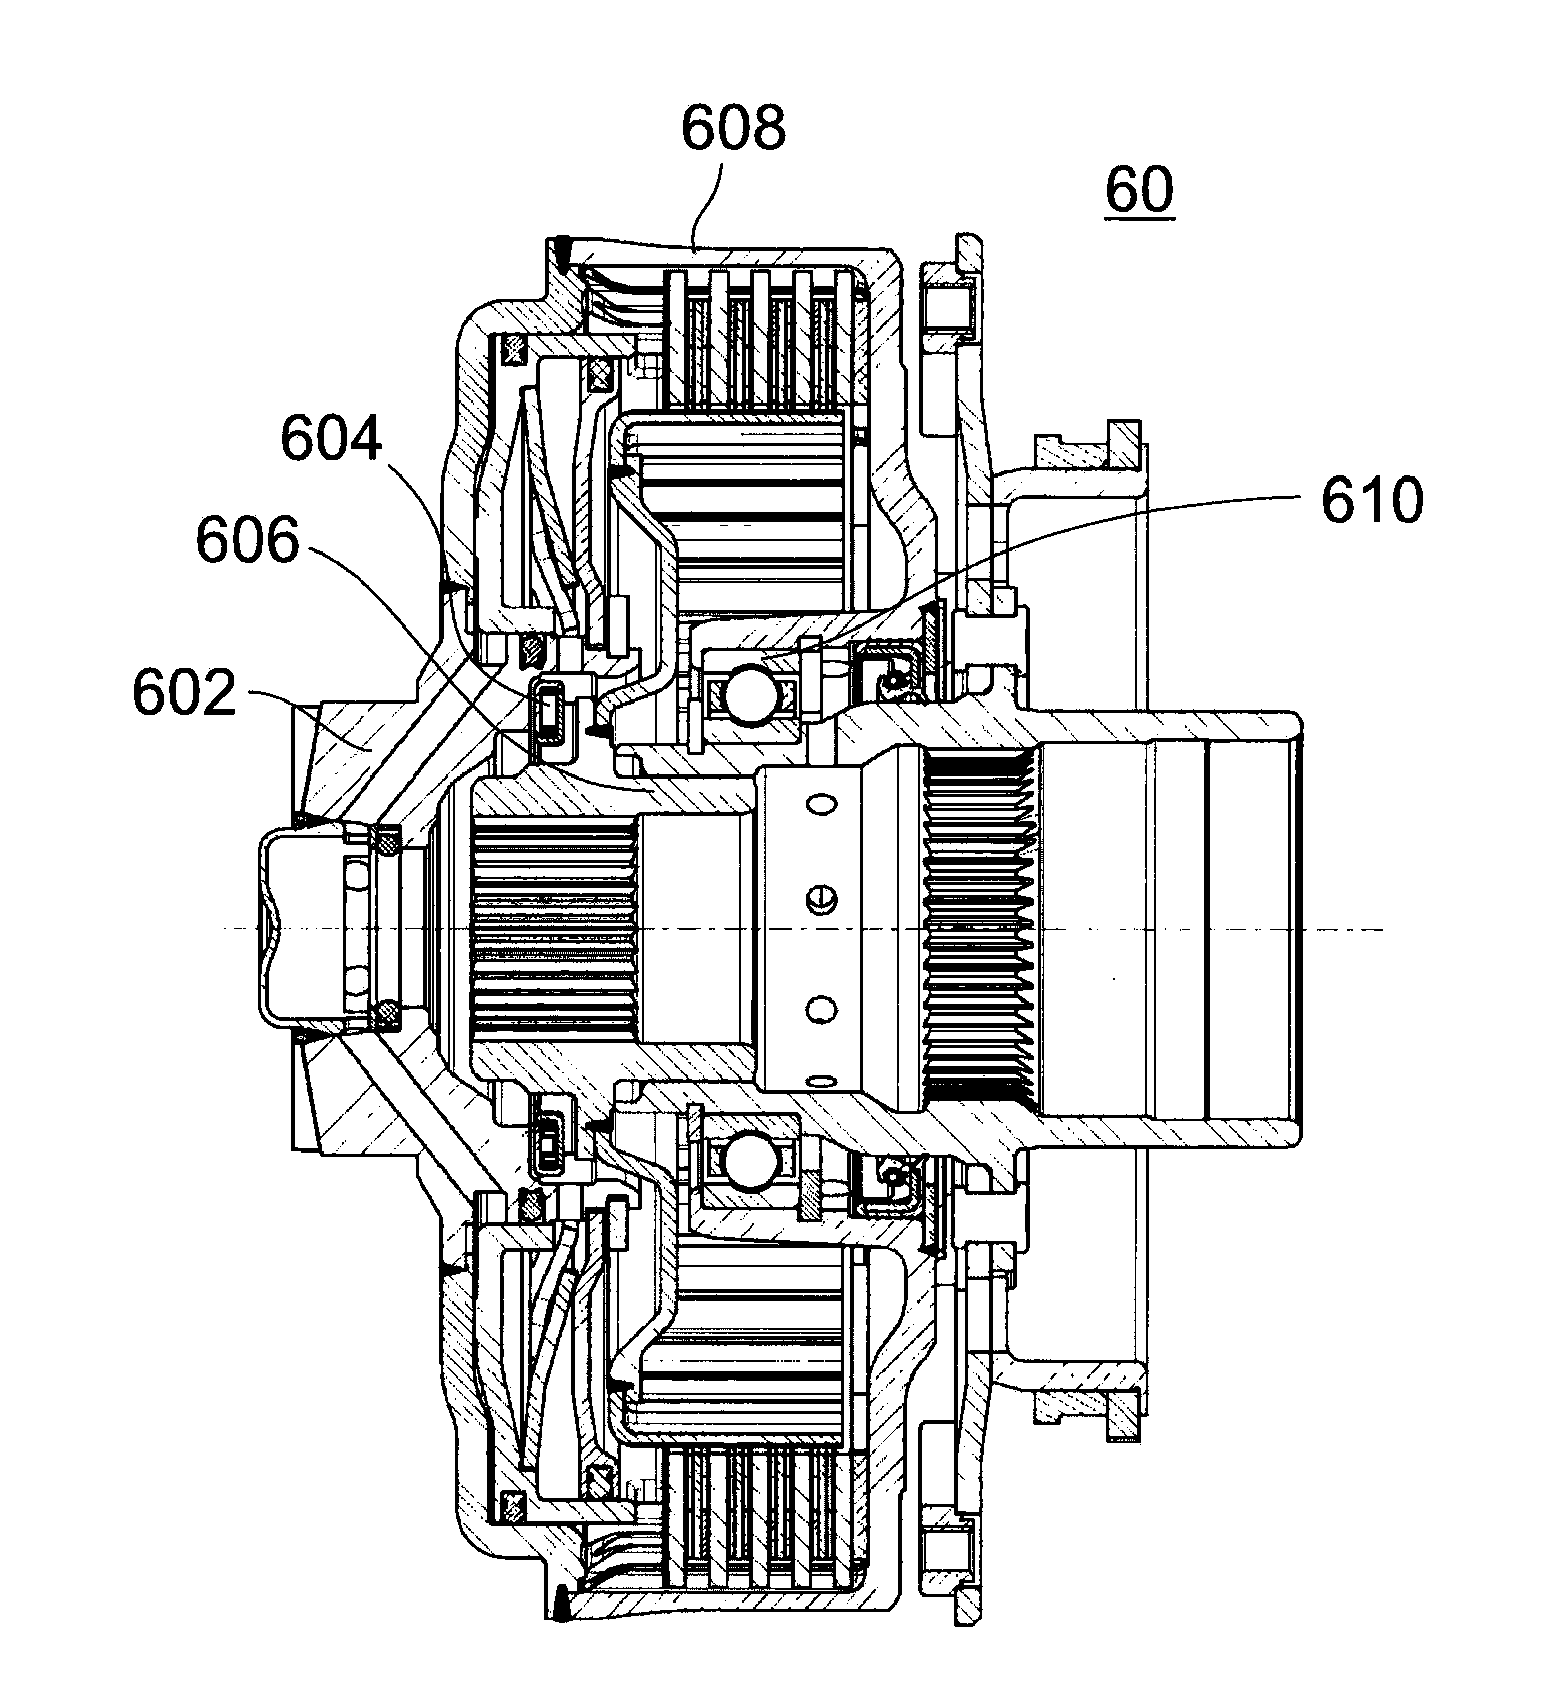 Torque Transmission Device With Electrical Insulation